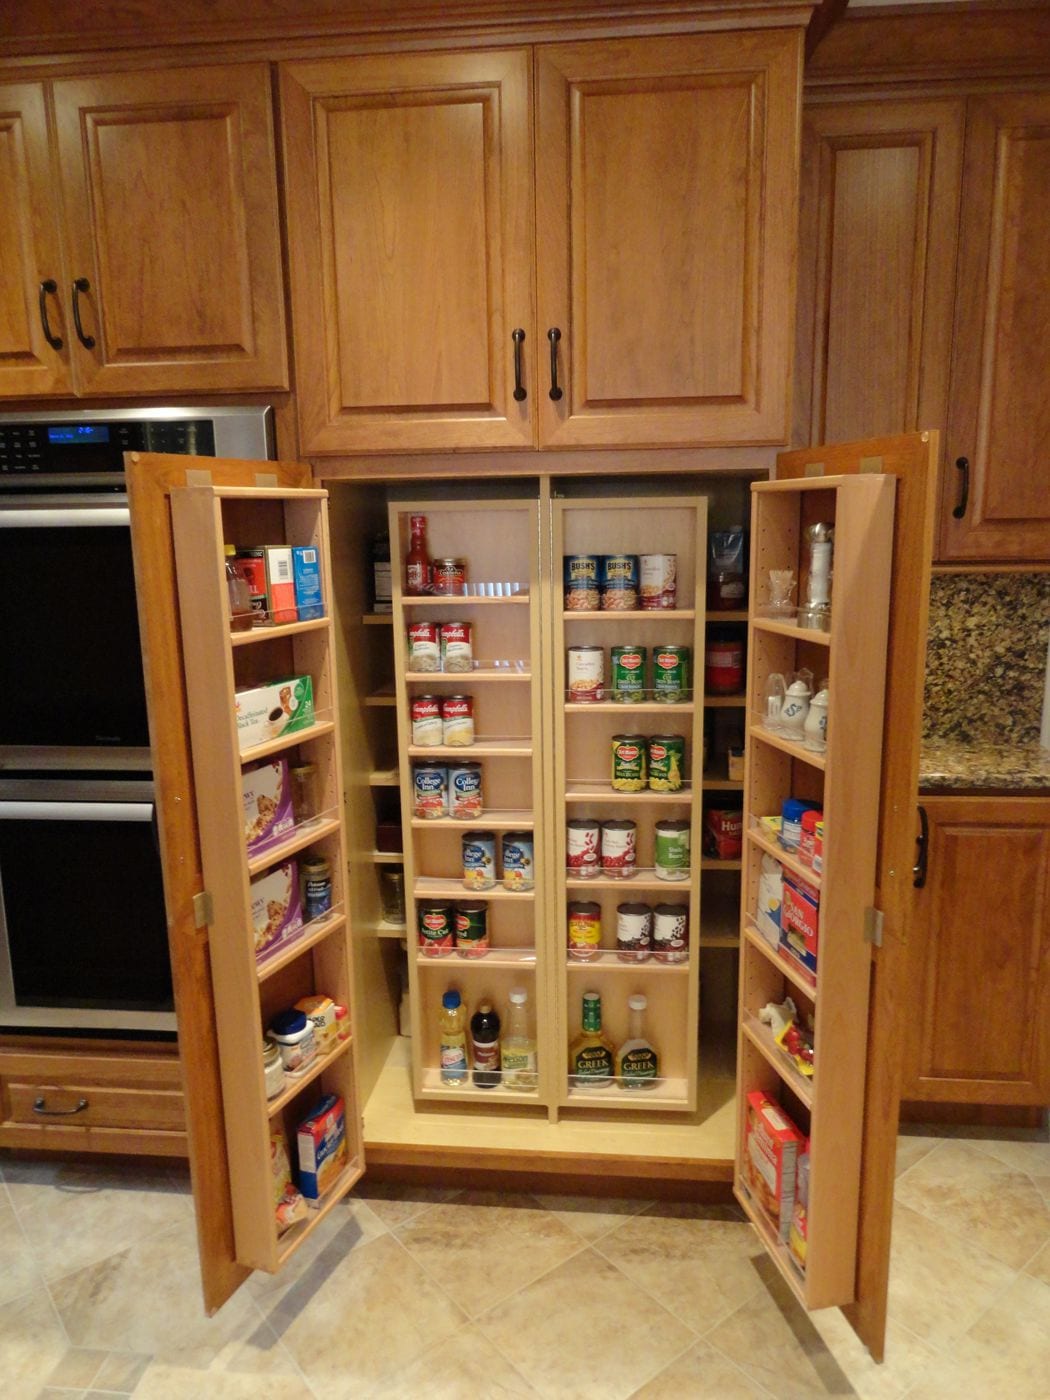 Re-imagining the Kitchen Pantry Cabinet - Mother Hubbard